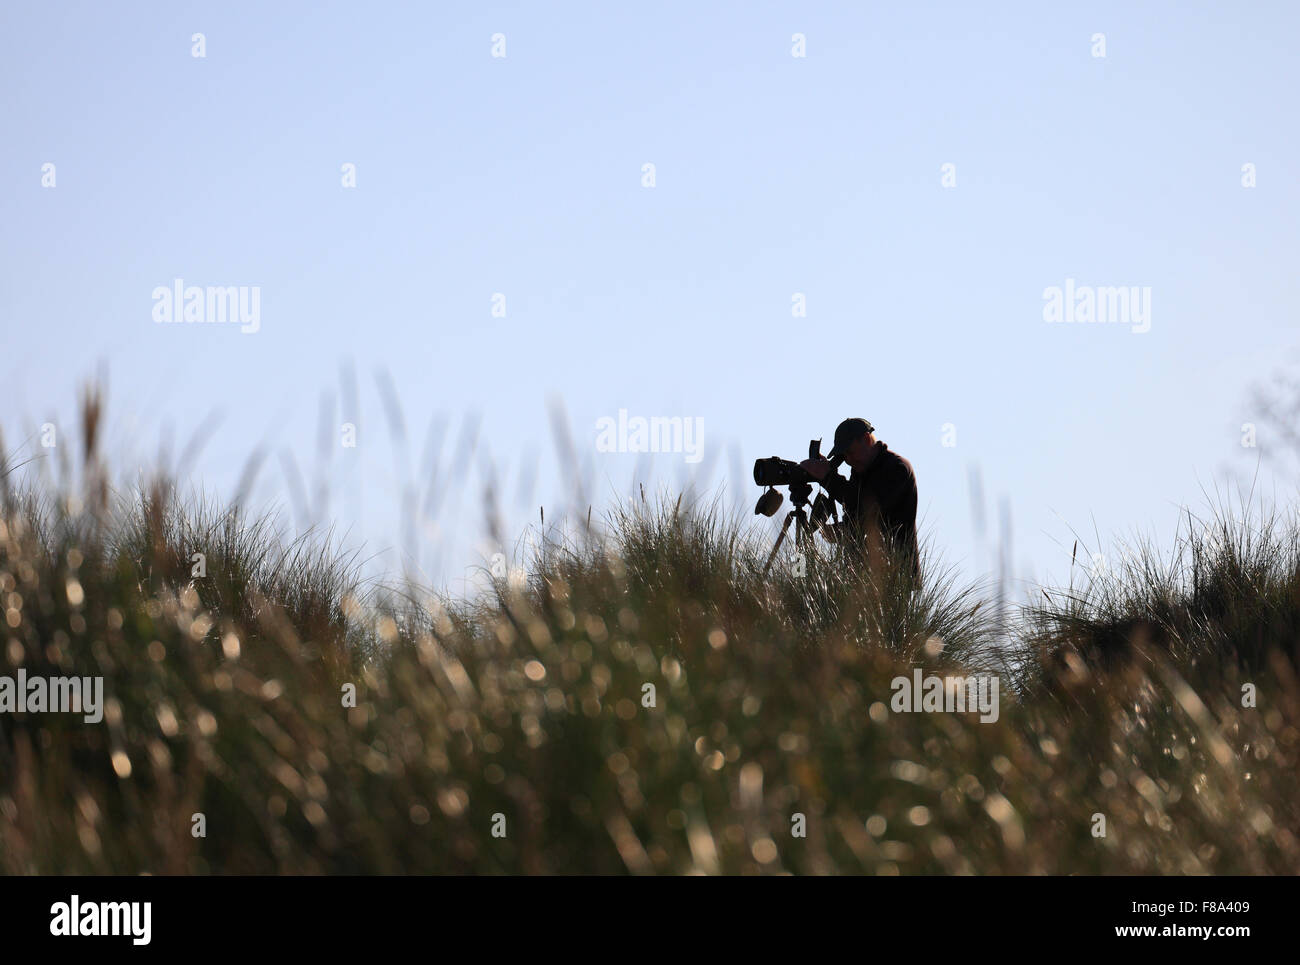 A man birdwatching at Holme Dunes Nature Reserve on the Norfolk coast. Stock Photo